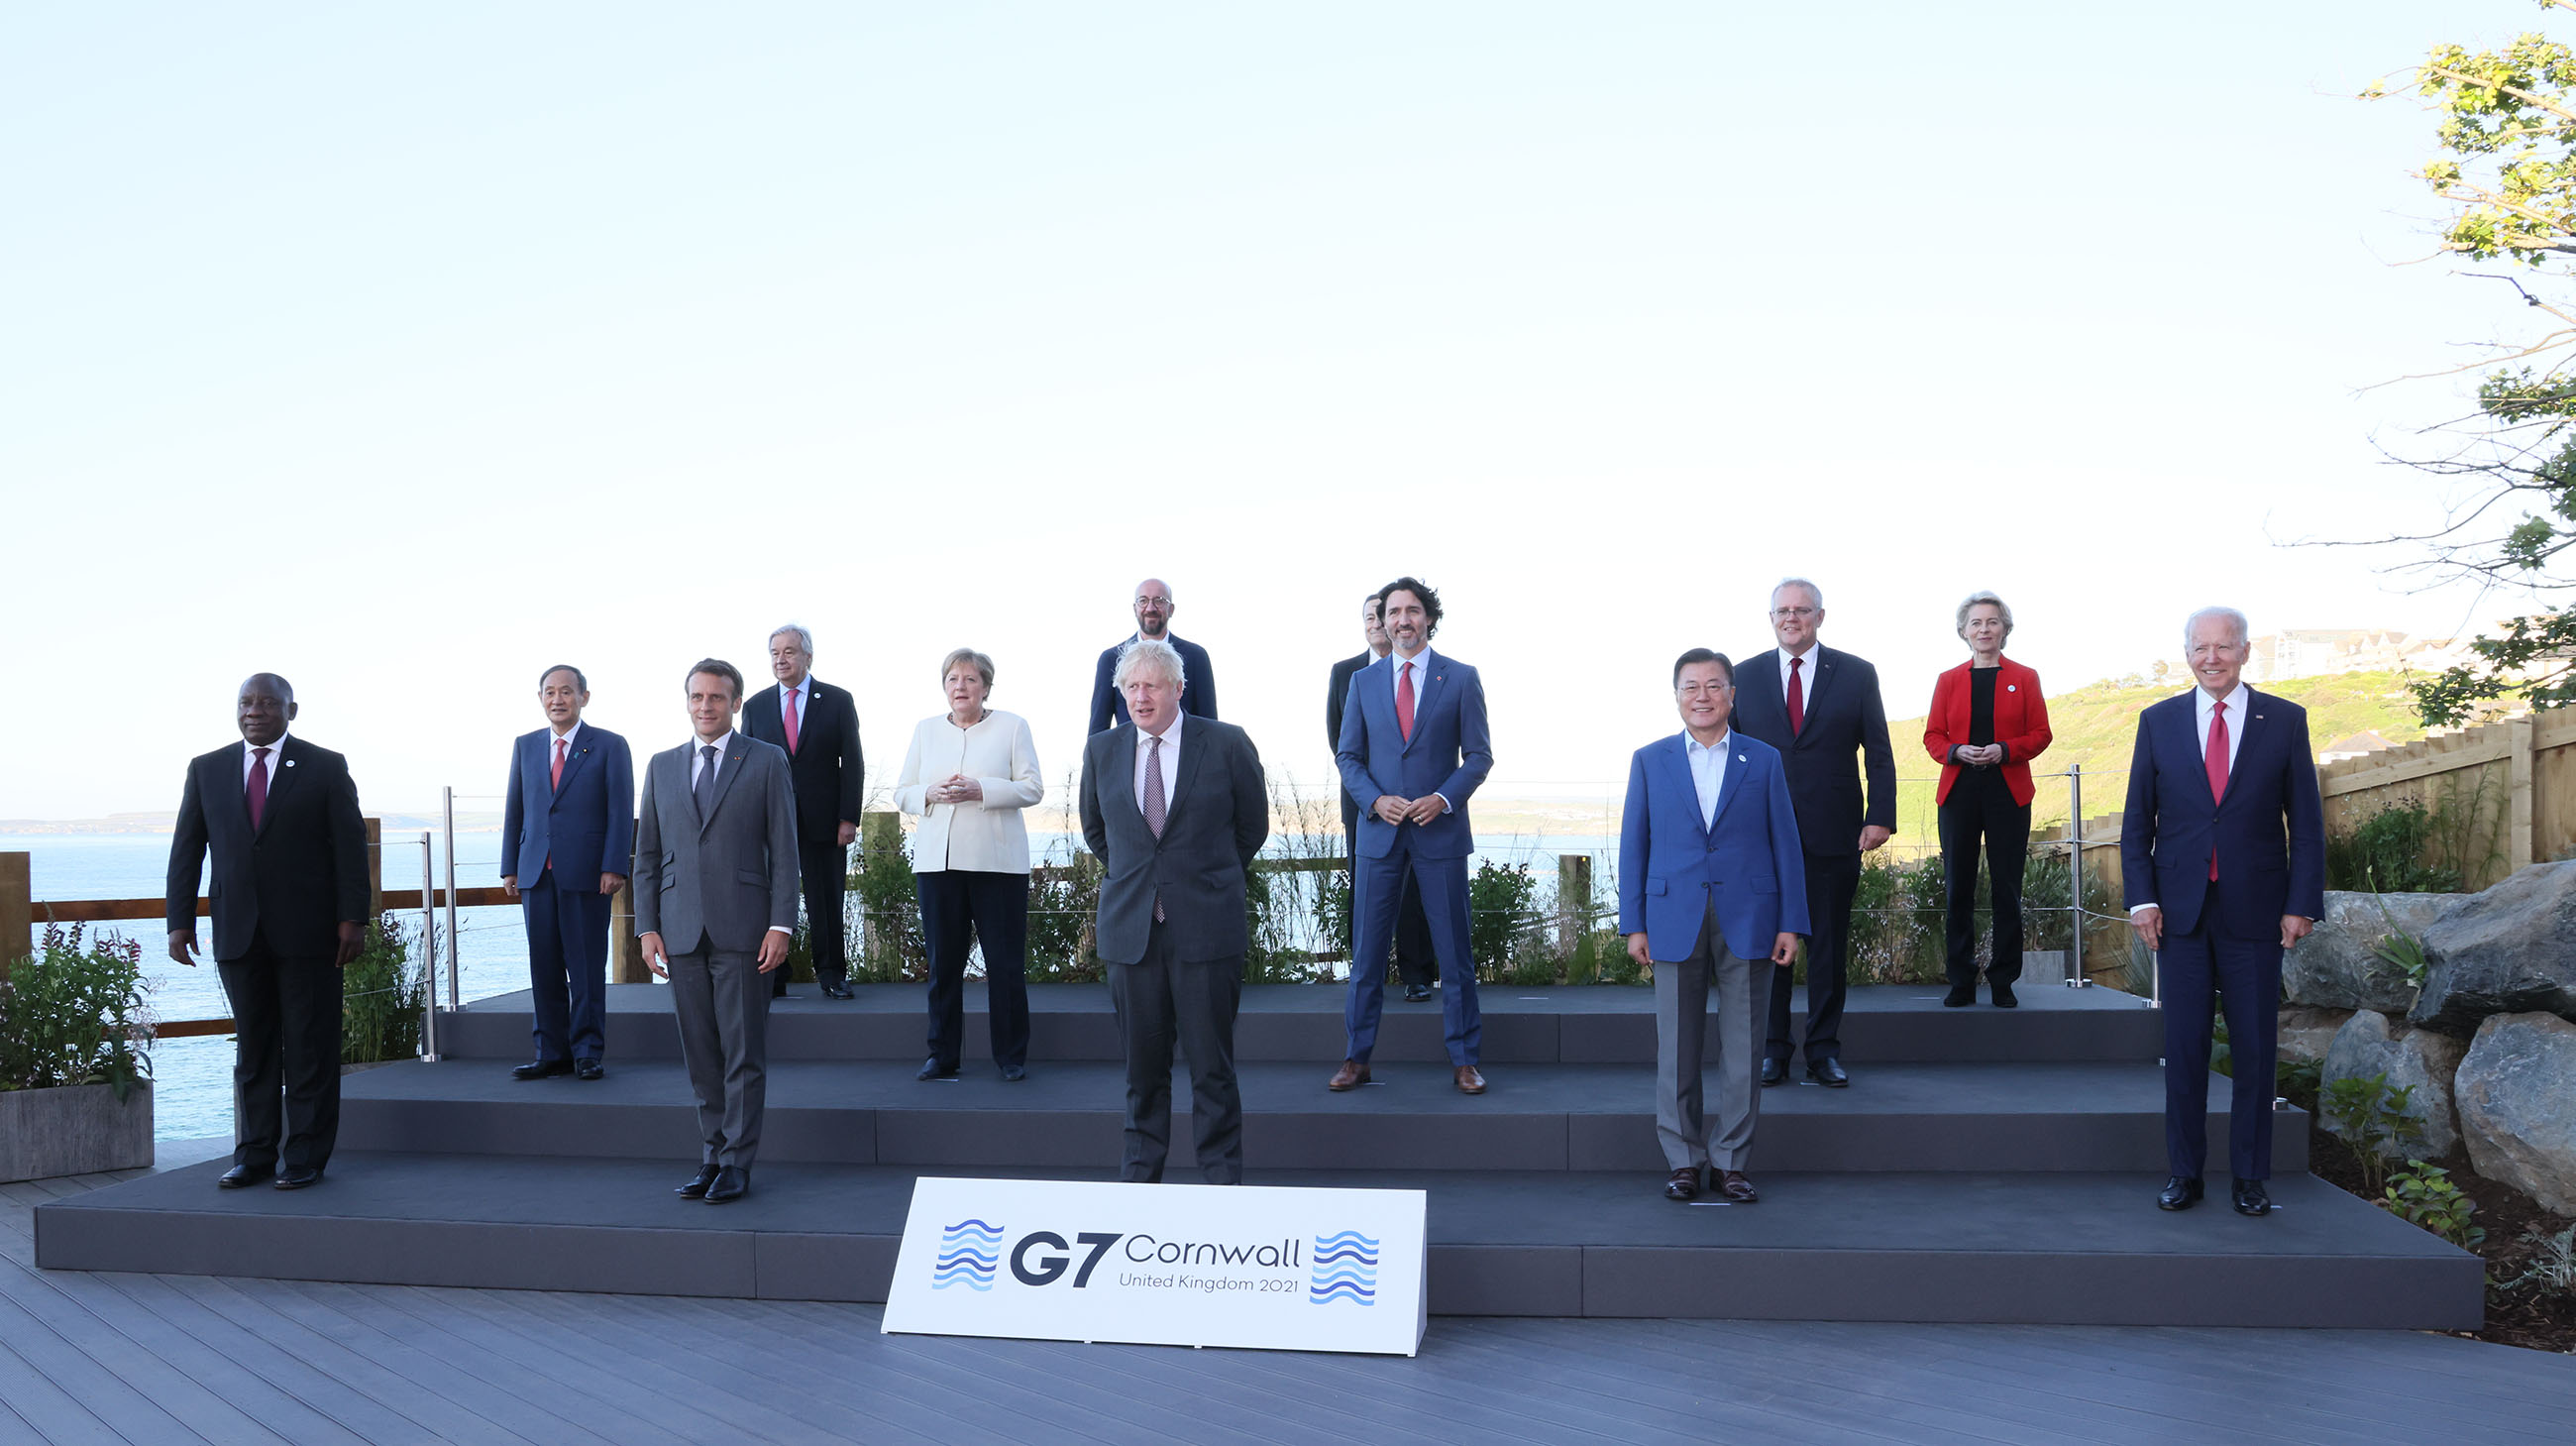 Photograph of the group photograph session with the leaders of the G7 members and guest countries (1)